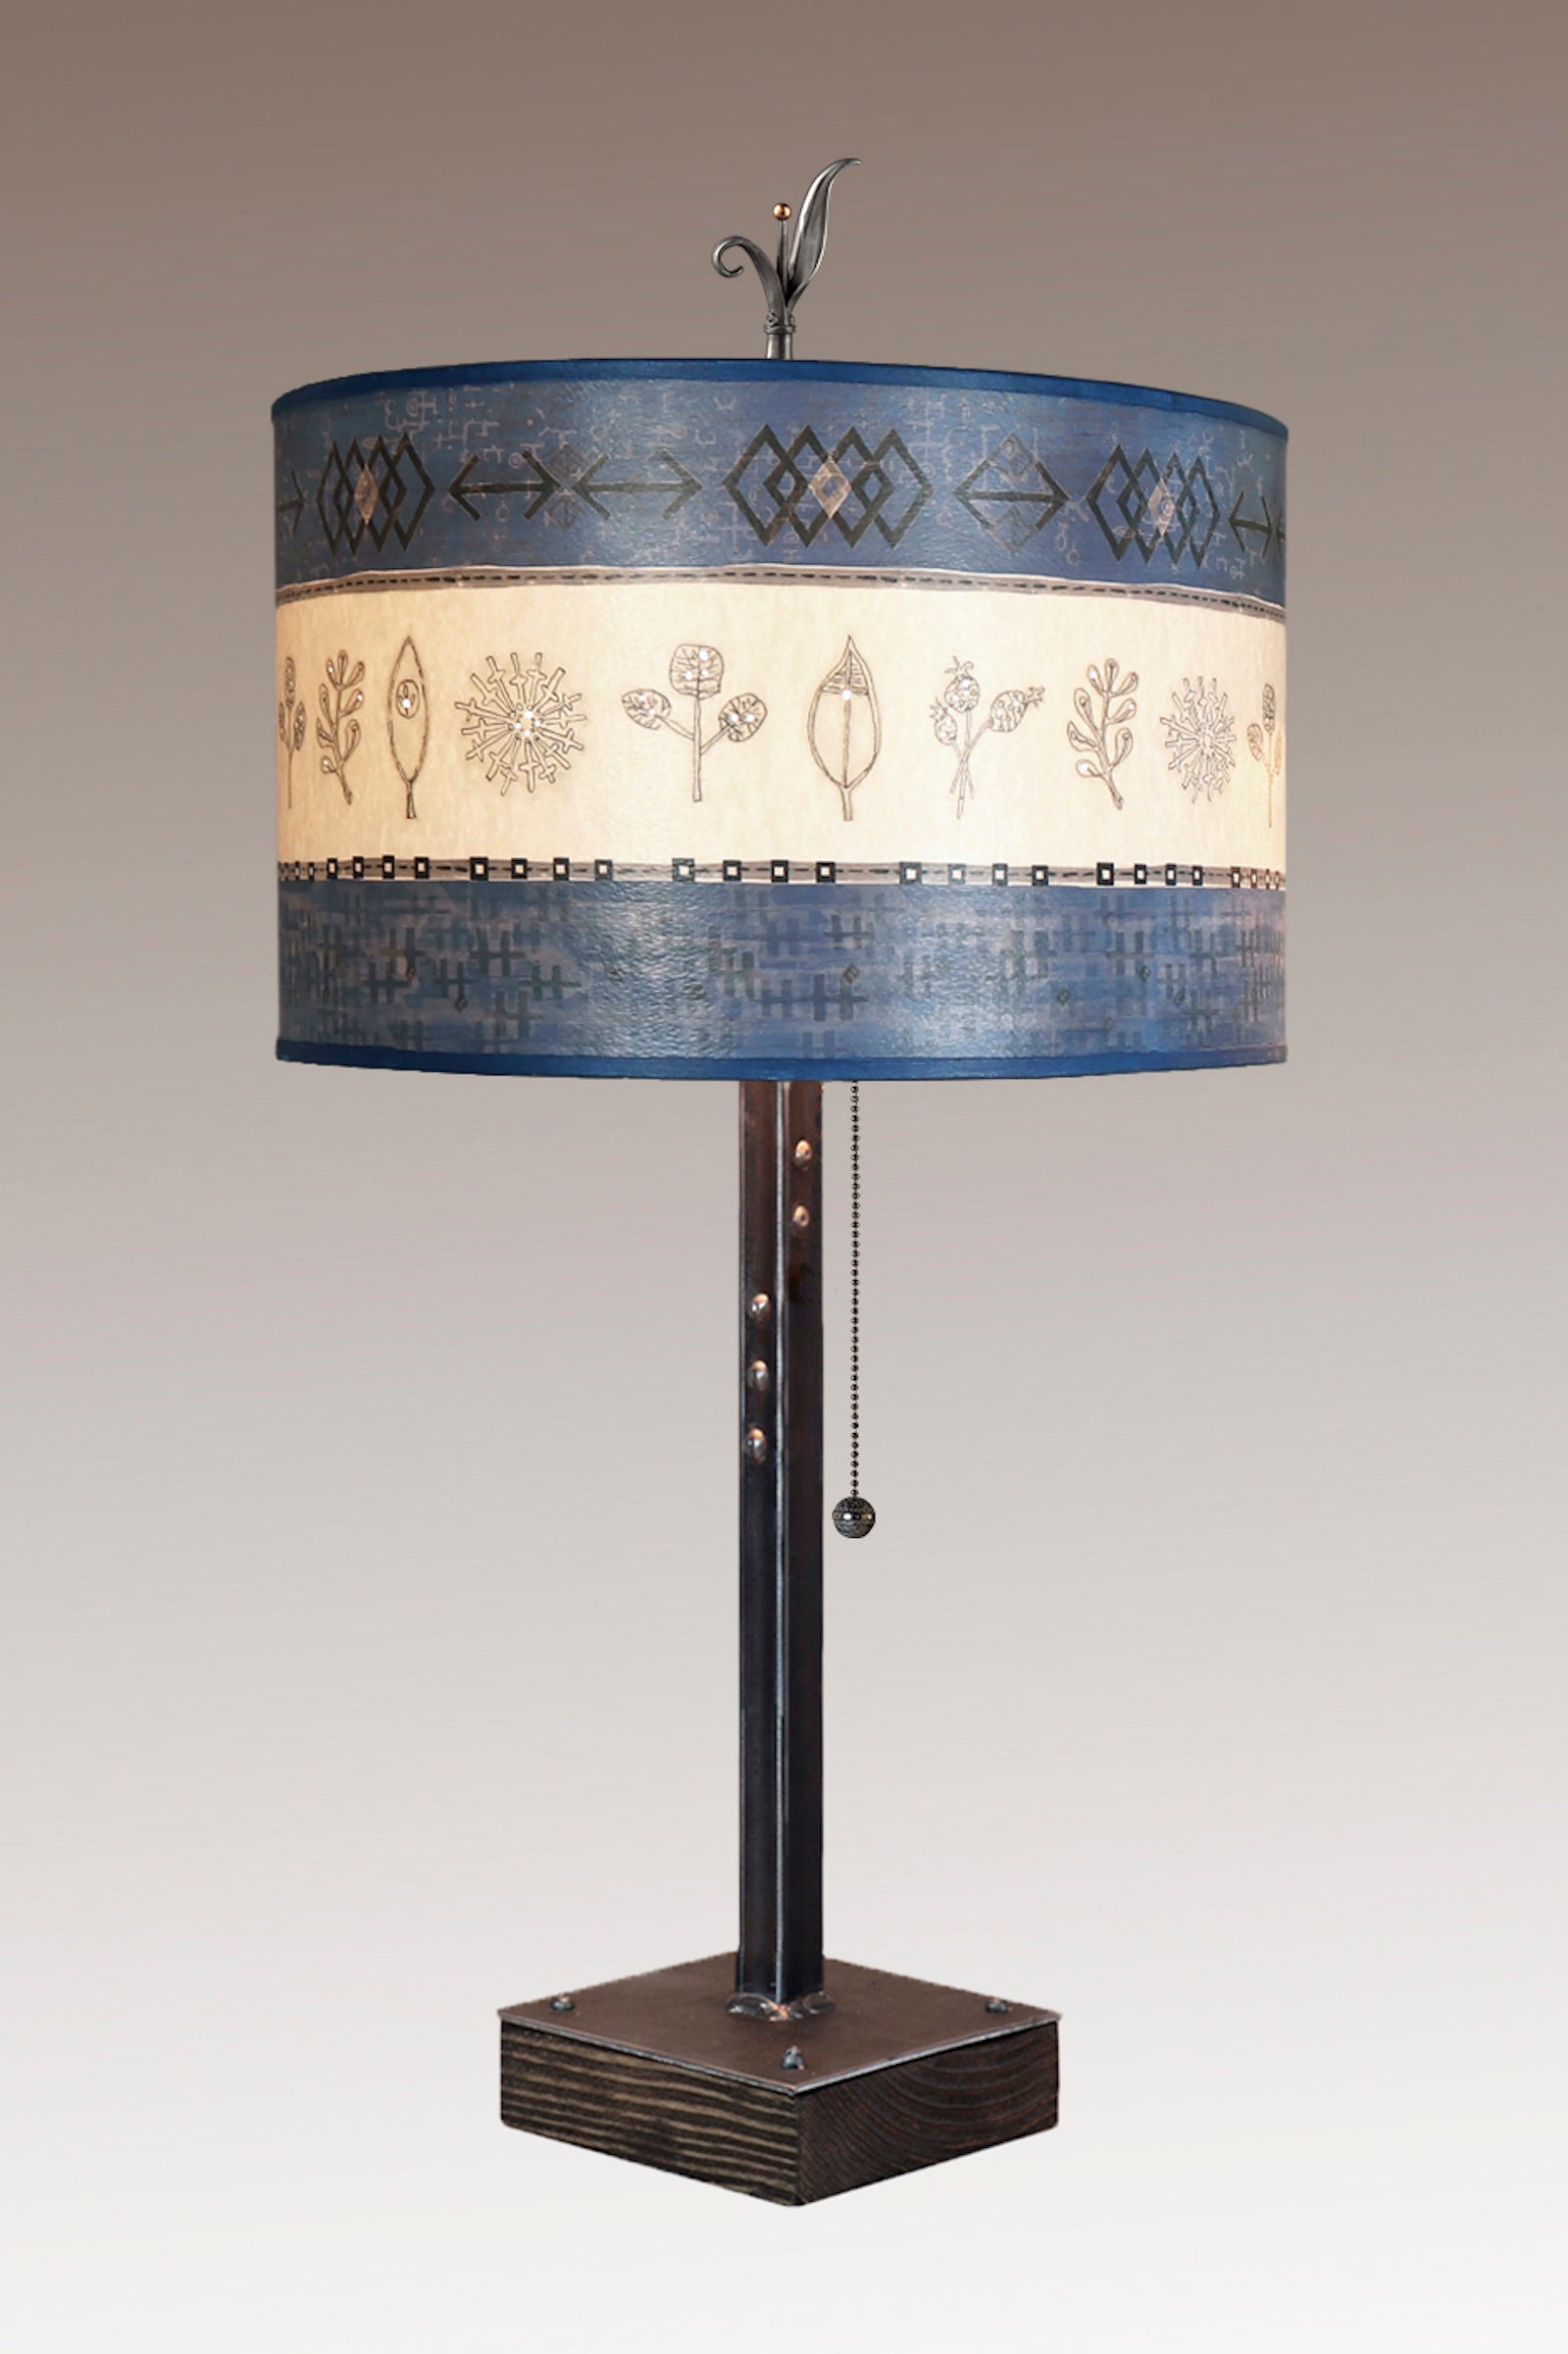 Janna Ugone & Co Table Lamps Steel Table Lamp on Wood with Large Drum Shade in Woven & Sprig in Sapphire